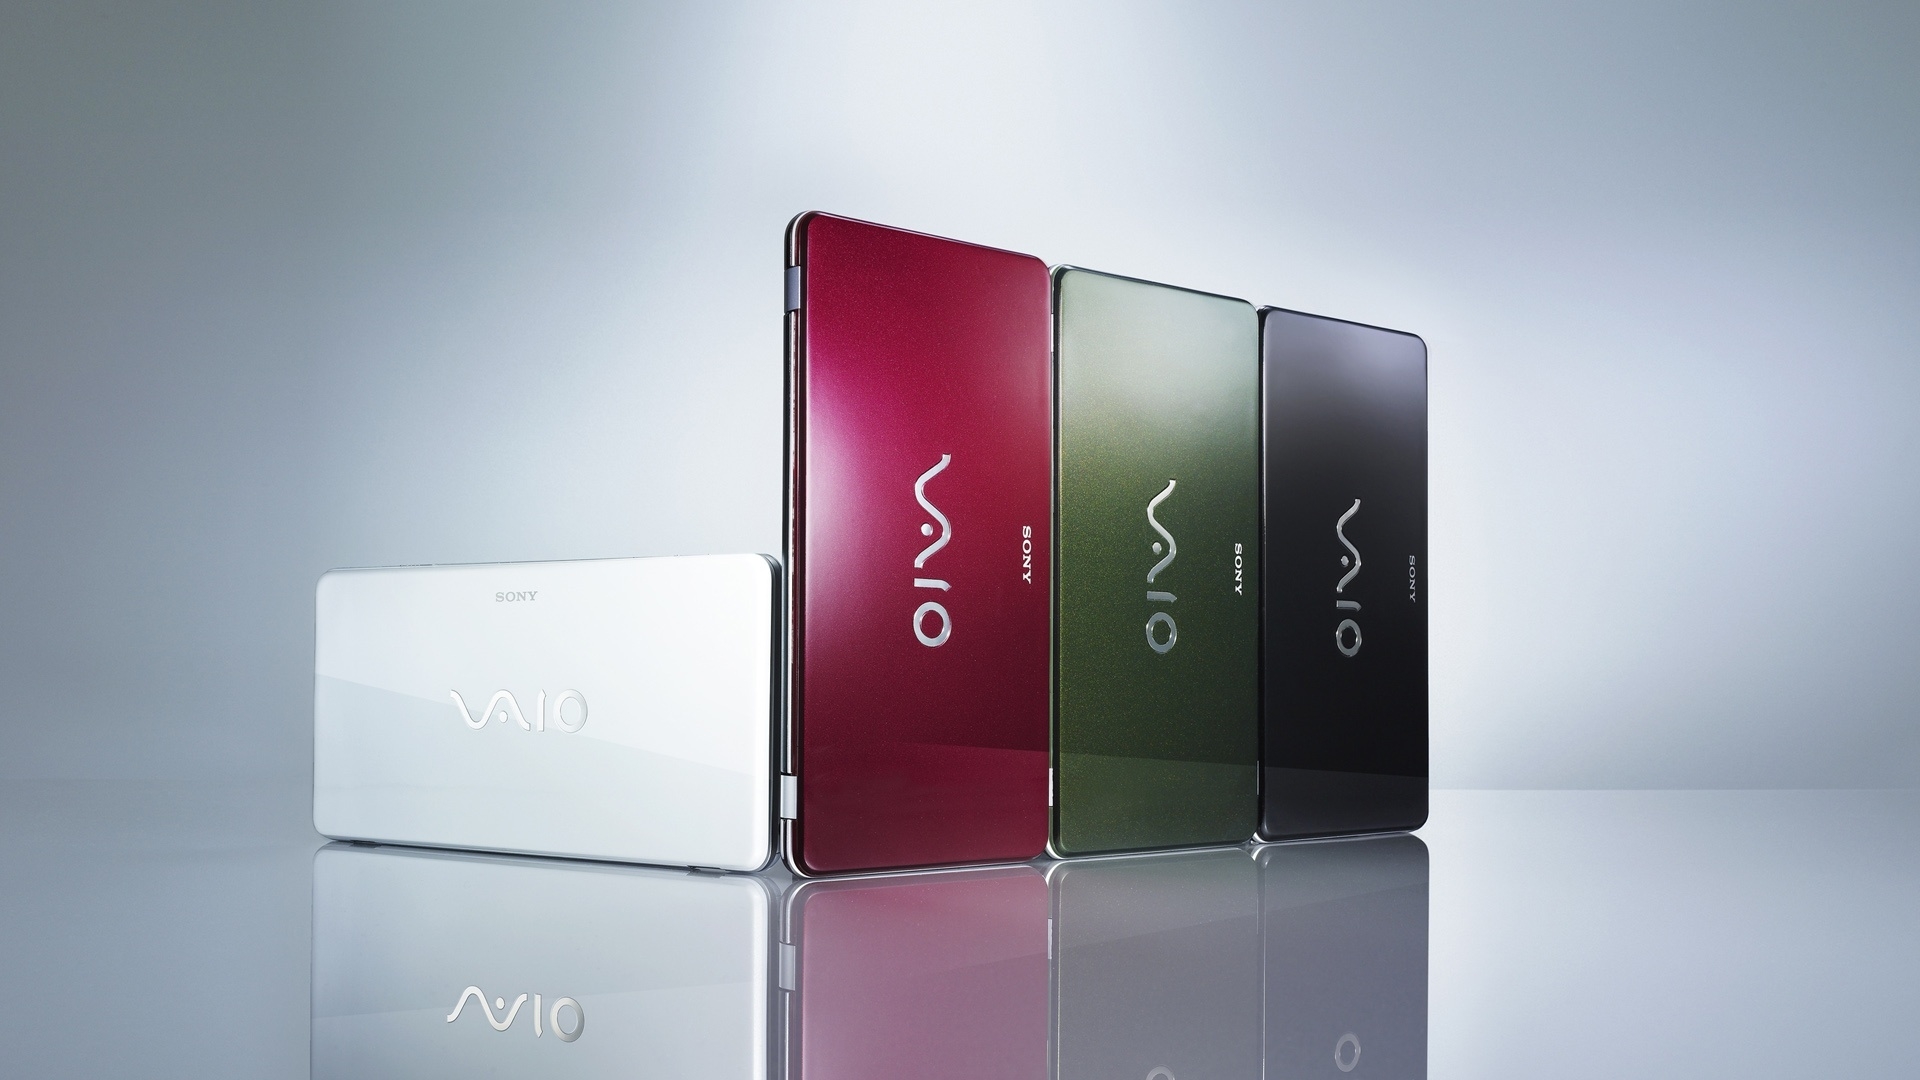 Sony Vaio 4 colors for 1920 x 1080 HDTV 1080p resolution